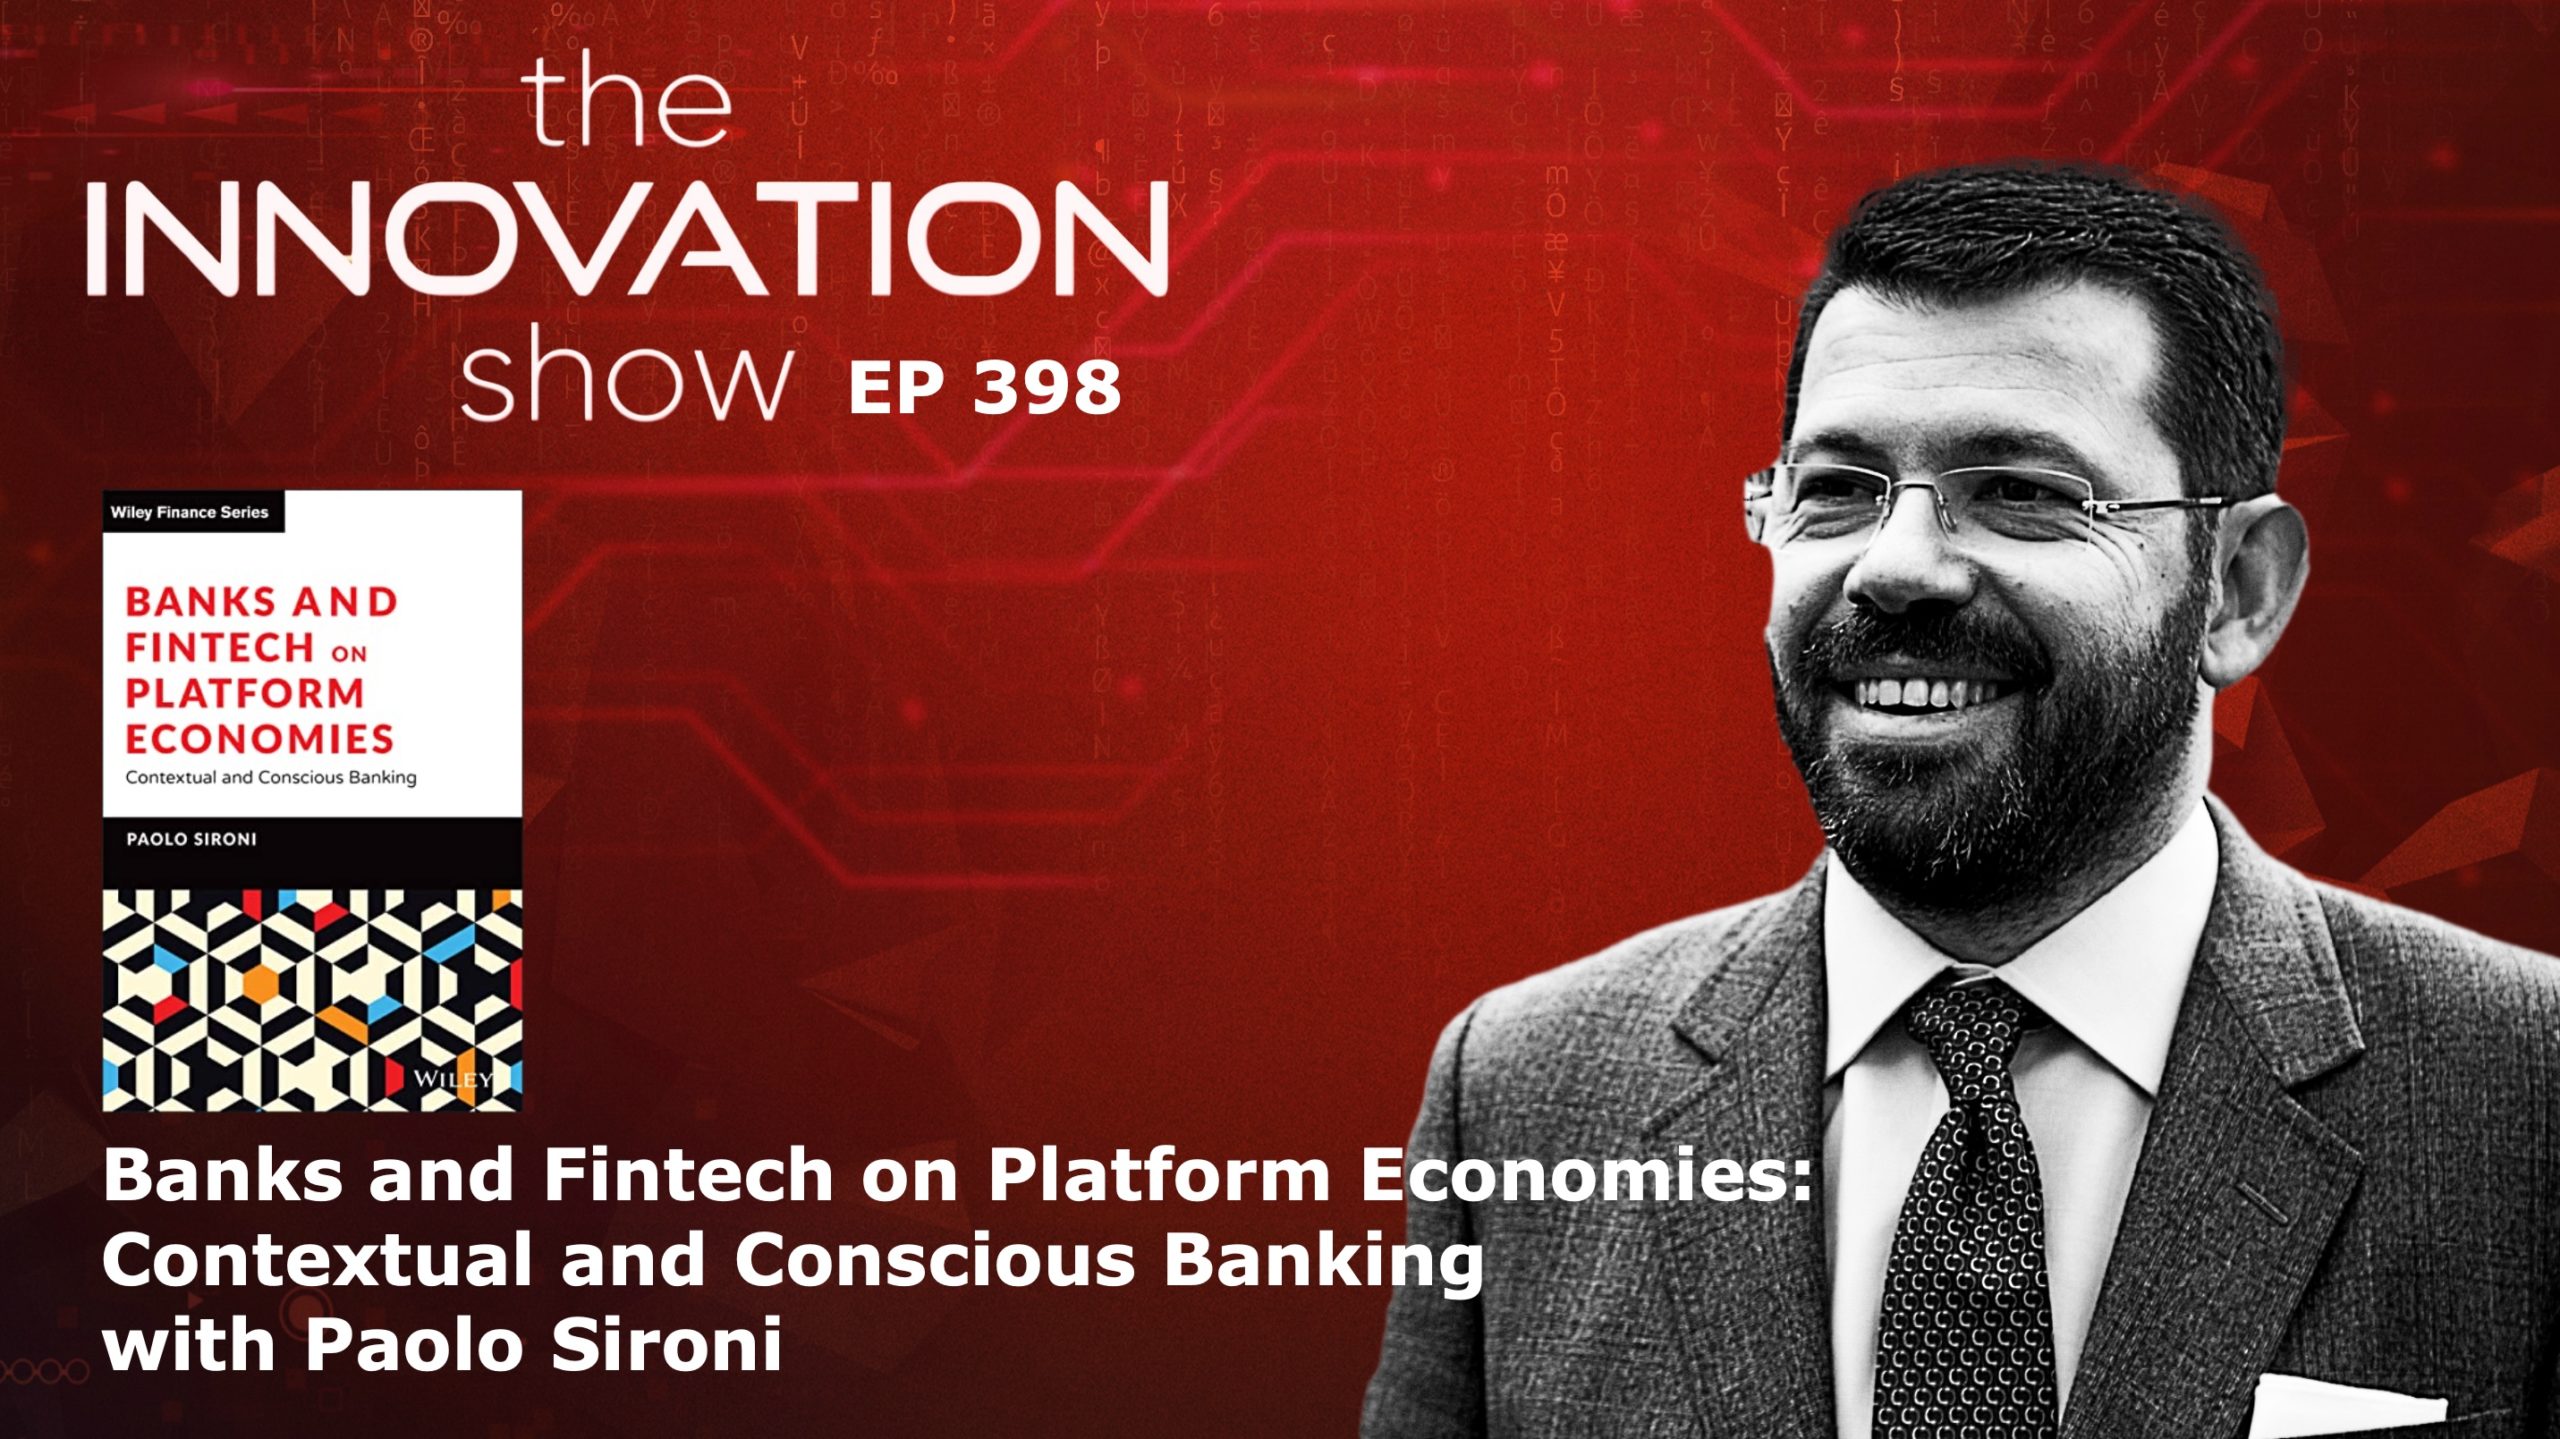 Banks and Fintech on Platform Economies: Contextual and Conscious Banking “ Paolo Sironi